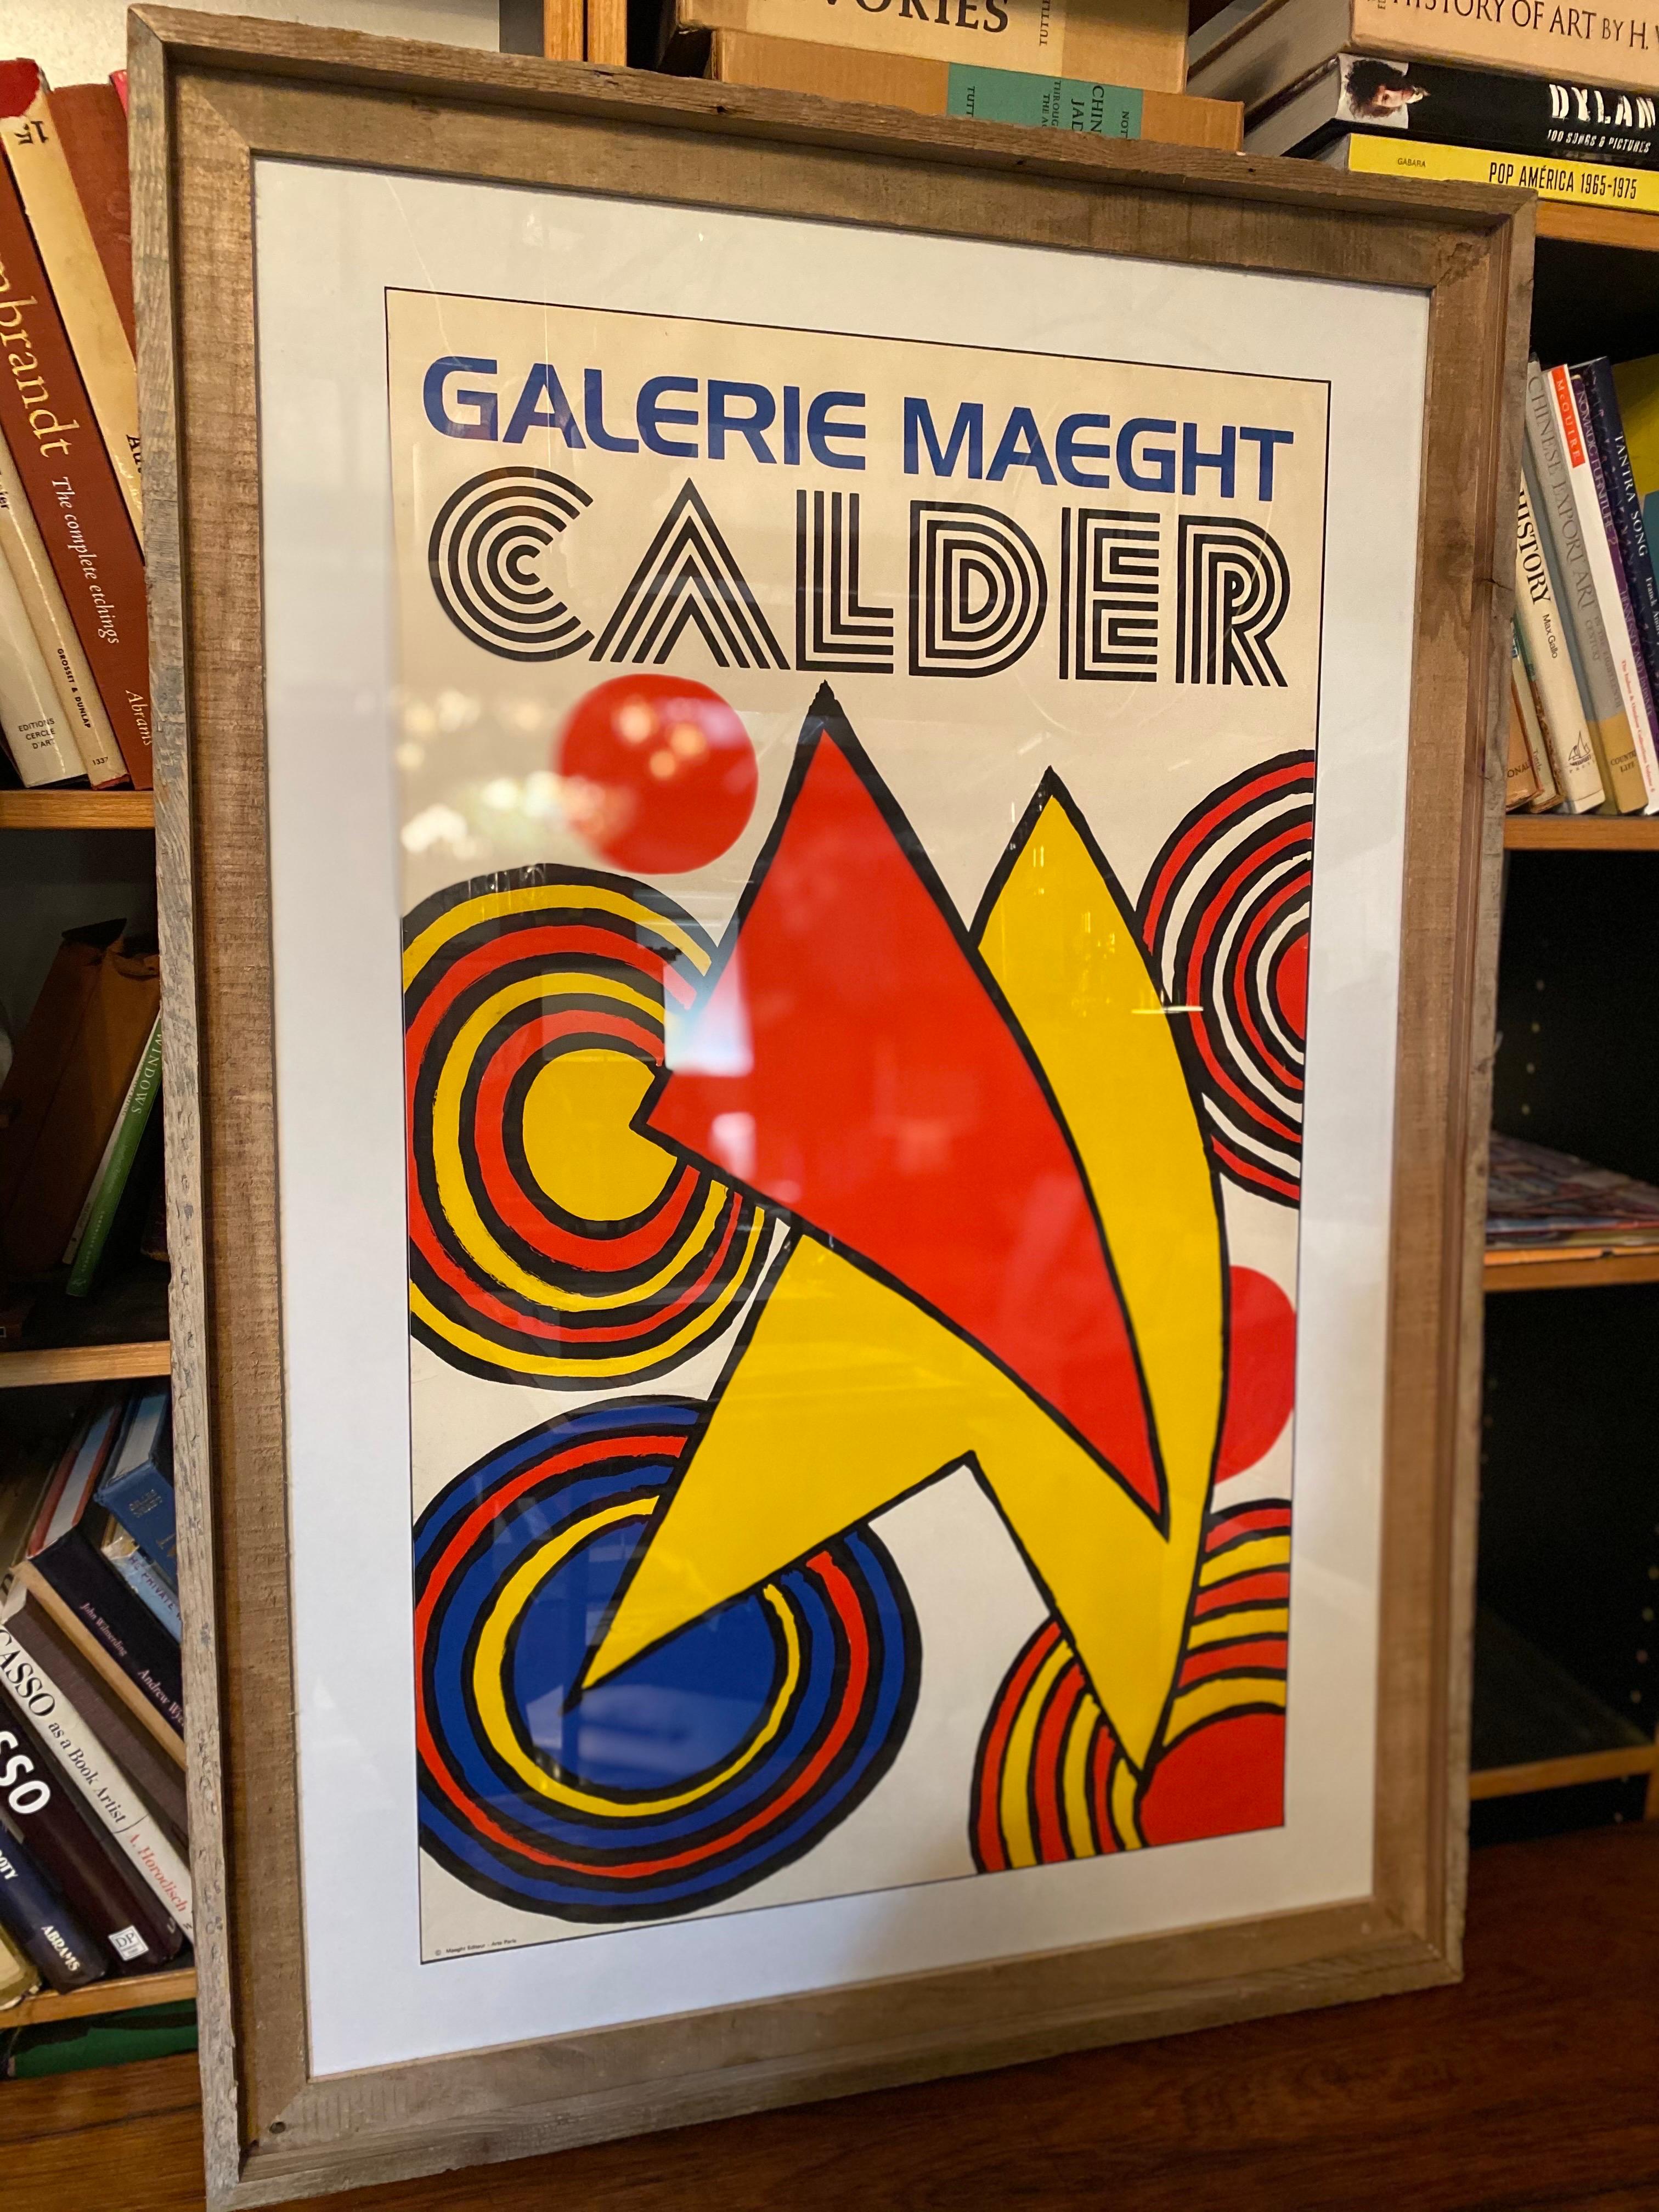 Alexander Calder Galerie Maeght framed exhibition poster, limited edition, 1970s, screen printed in France. 

